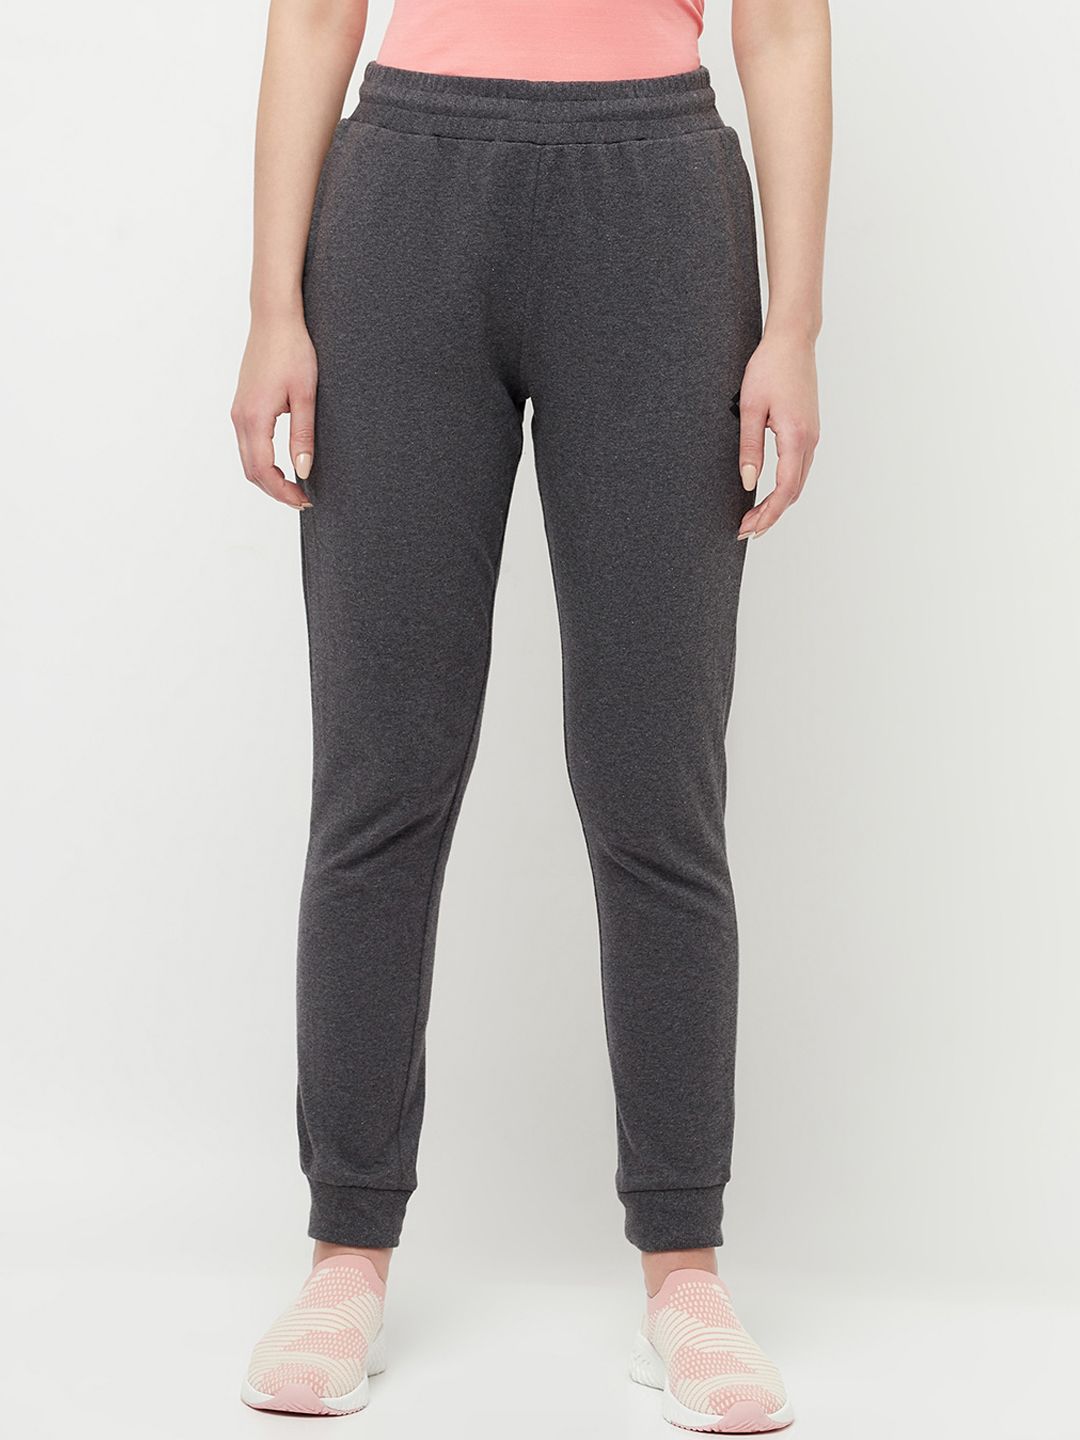 Lotto Women Charcoal Grey Solid Cotton Regular Joggers Price in India